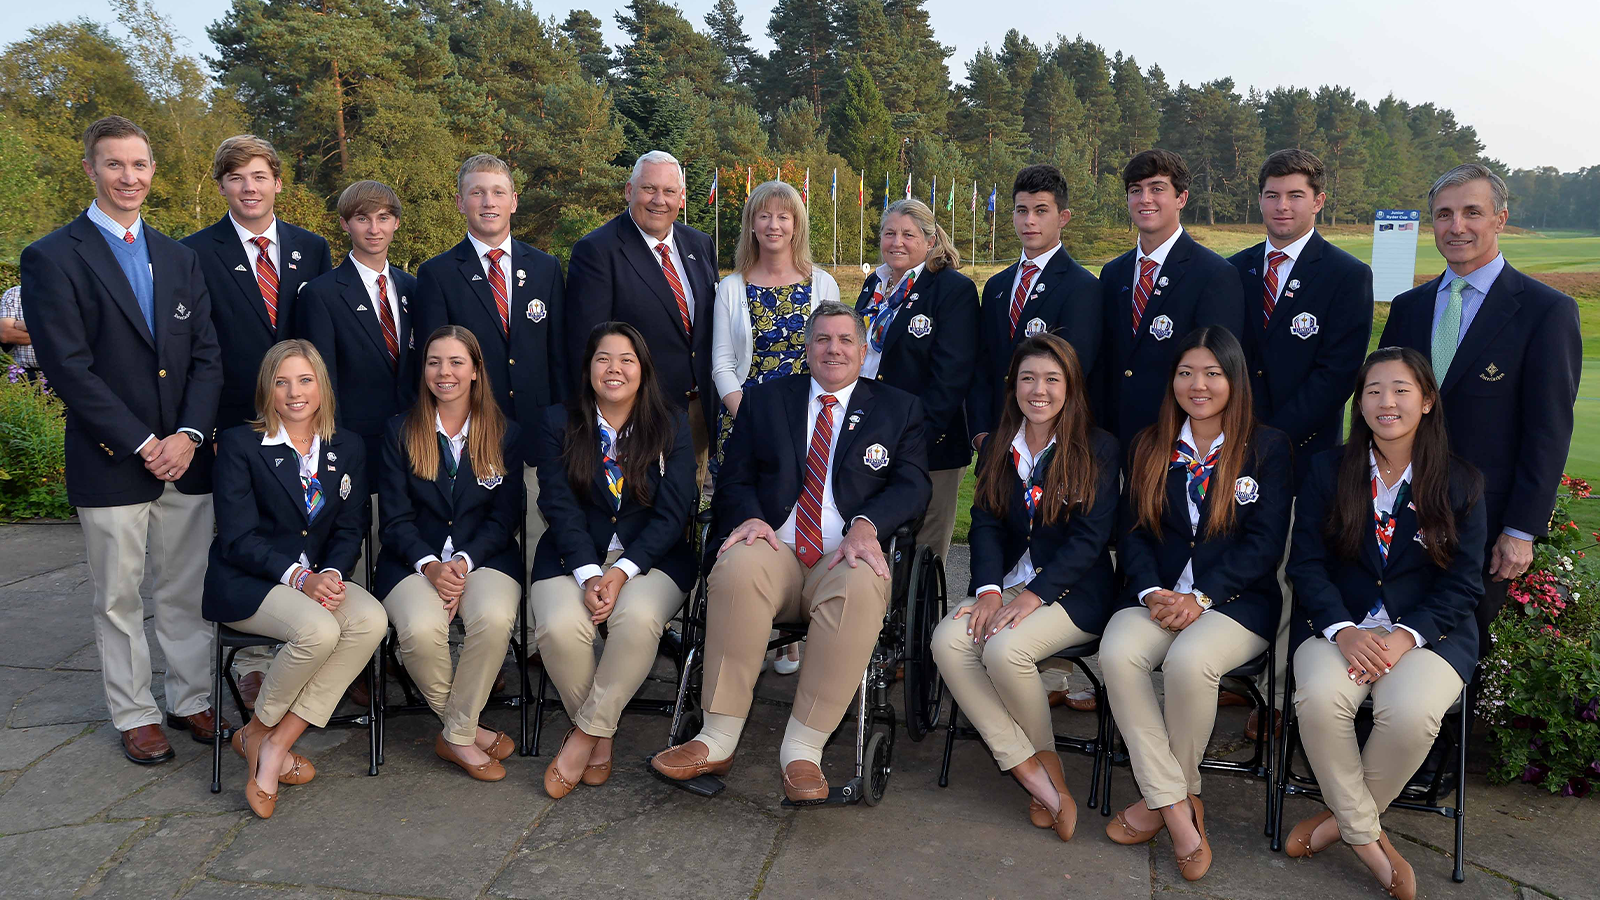  The USA team Photograph - (Front L-R) Sierra Brooks, Kristen Gillman, Bethany Wu, Brian Whitcomb (USA Team Captain), Hannah O'Sullivan, Amy Lee and Andrea Lee, (Back L-R), Nathan Ollhoff, Sam Burns, Austin Connelly, Brad Dalke, Allen Wronowski (PGA Honorary President), Shona Robison (cabinet Minister for Sport) Mary Bea Porter King, (Assistant Captain), Gordon Neale, Cameron Young, Davis Riley and Jake Romanow, during the Opening Ceremony of the 2014 Junior Ryder Cup at Blairgowrie Golf Club on September 21, 2014 in Perth, Scotland. (Photo by Mark Runnacles/Getty Images)